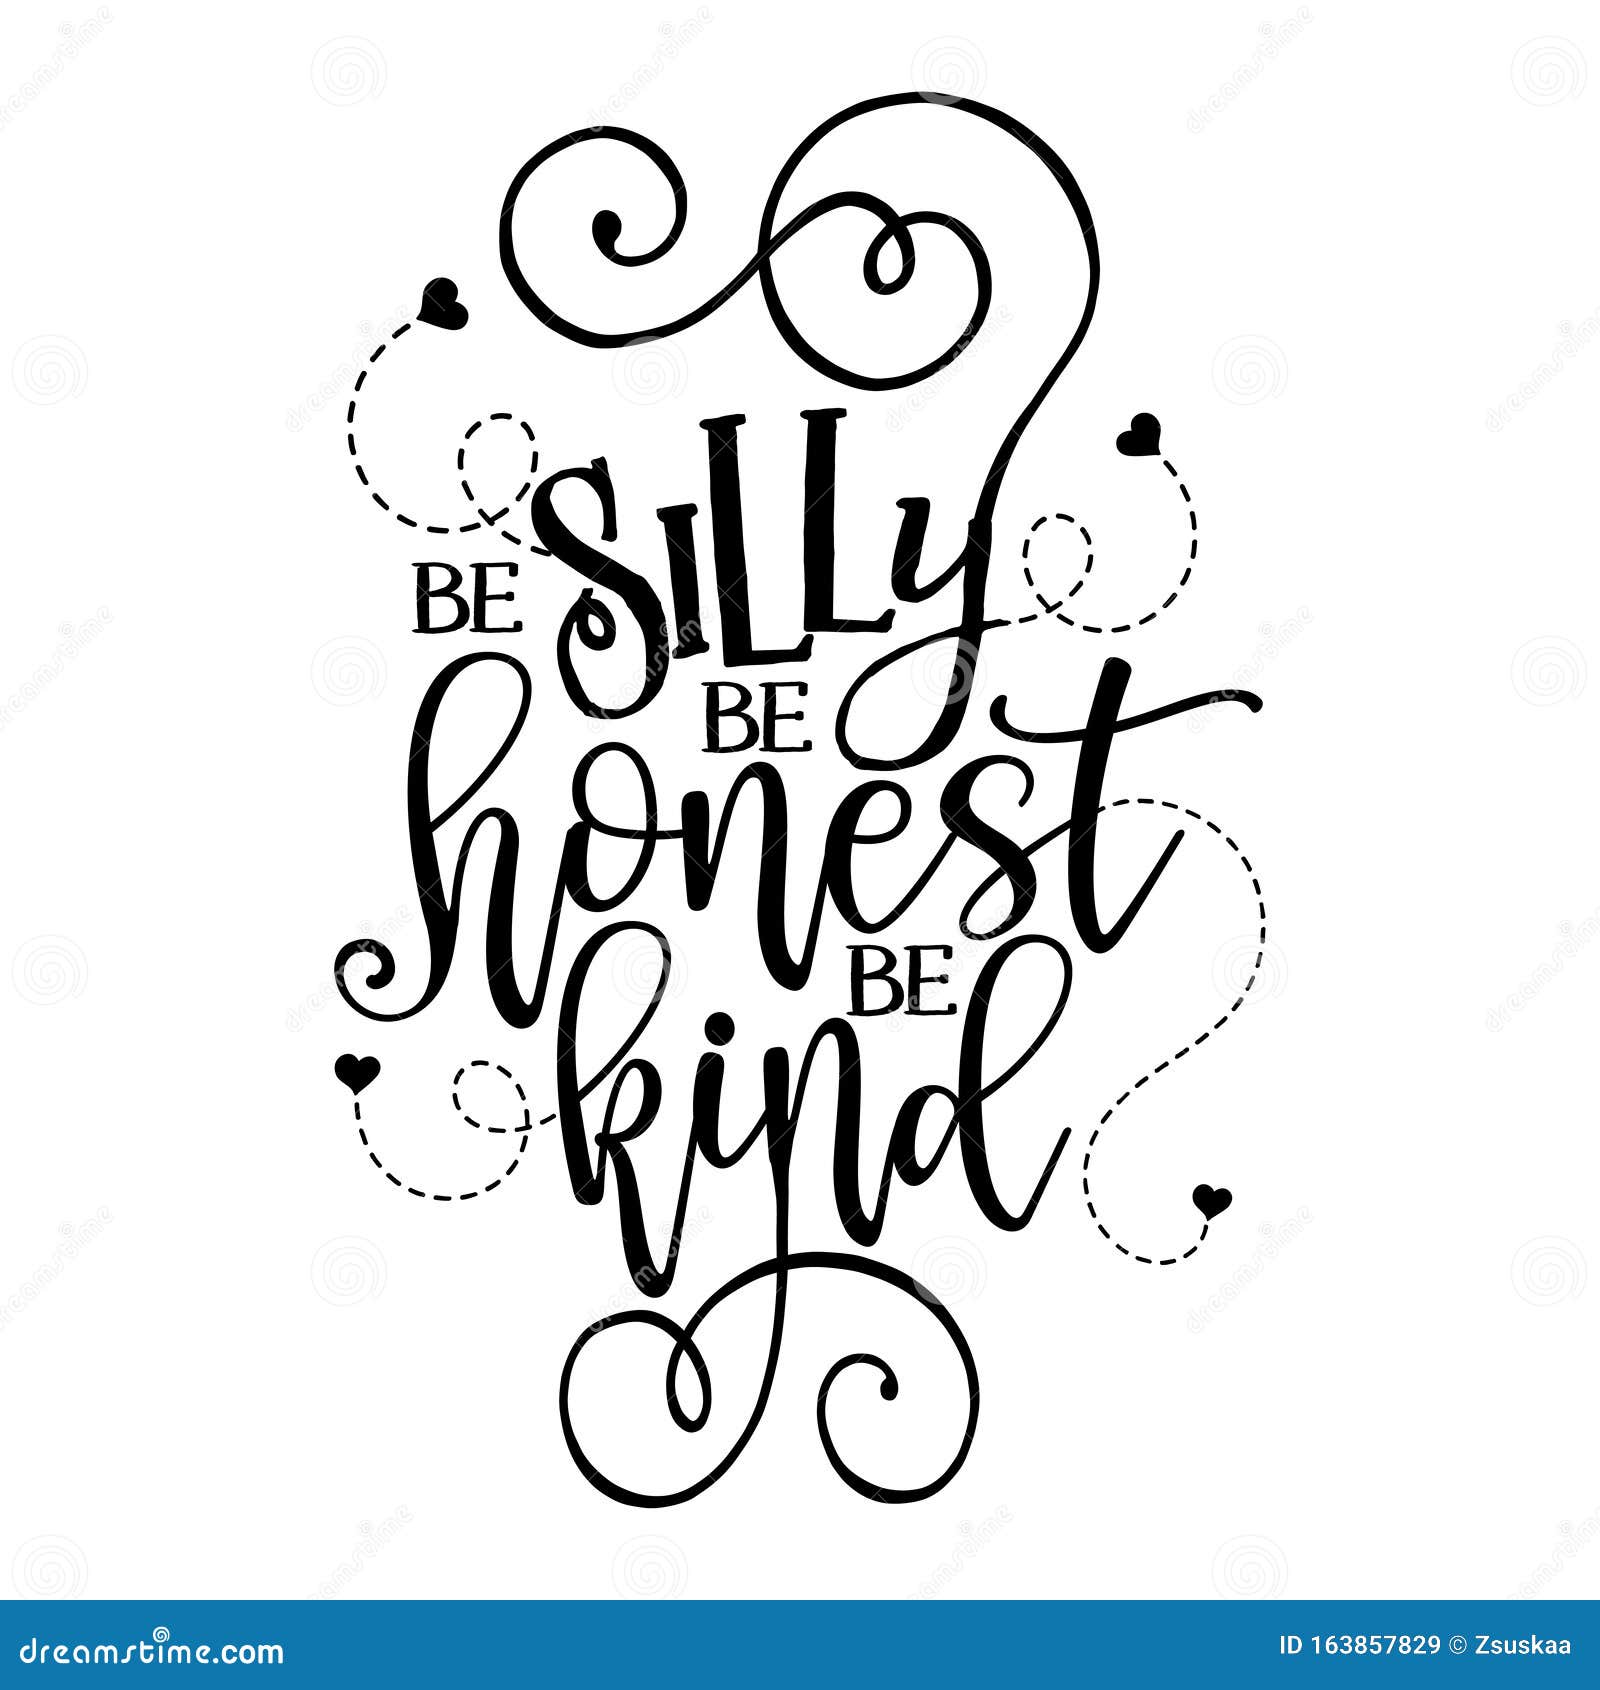 be silly be honest be kind - funny hand drawn calligraphy text.